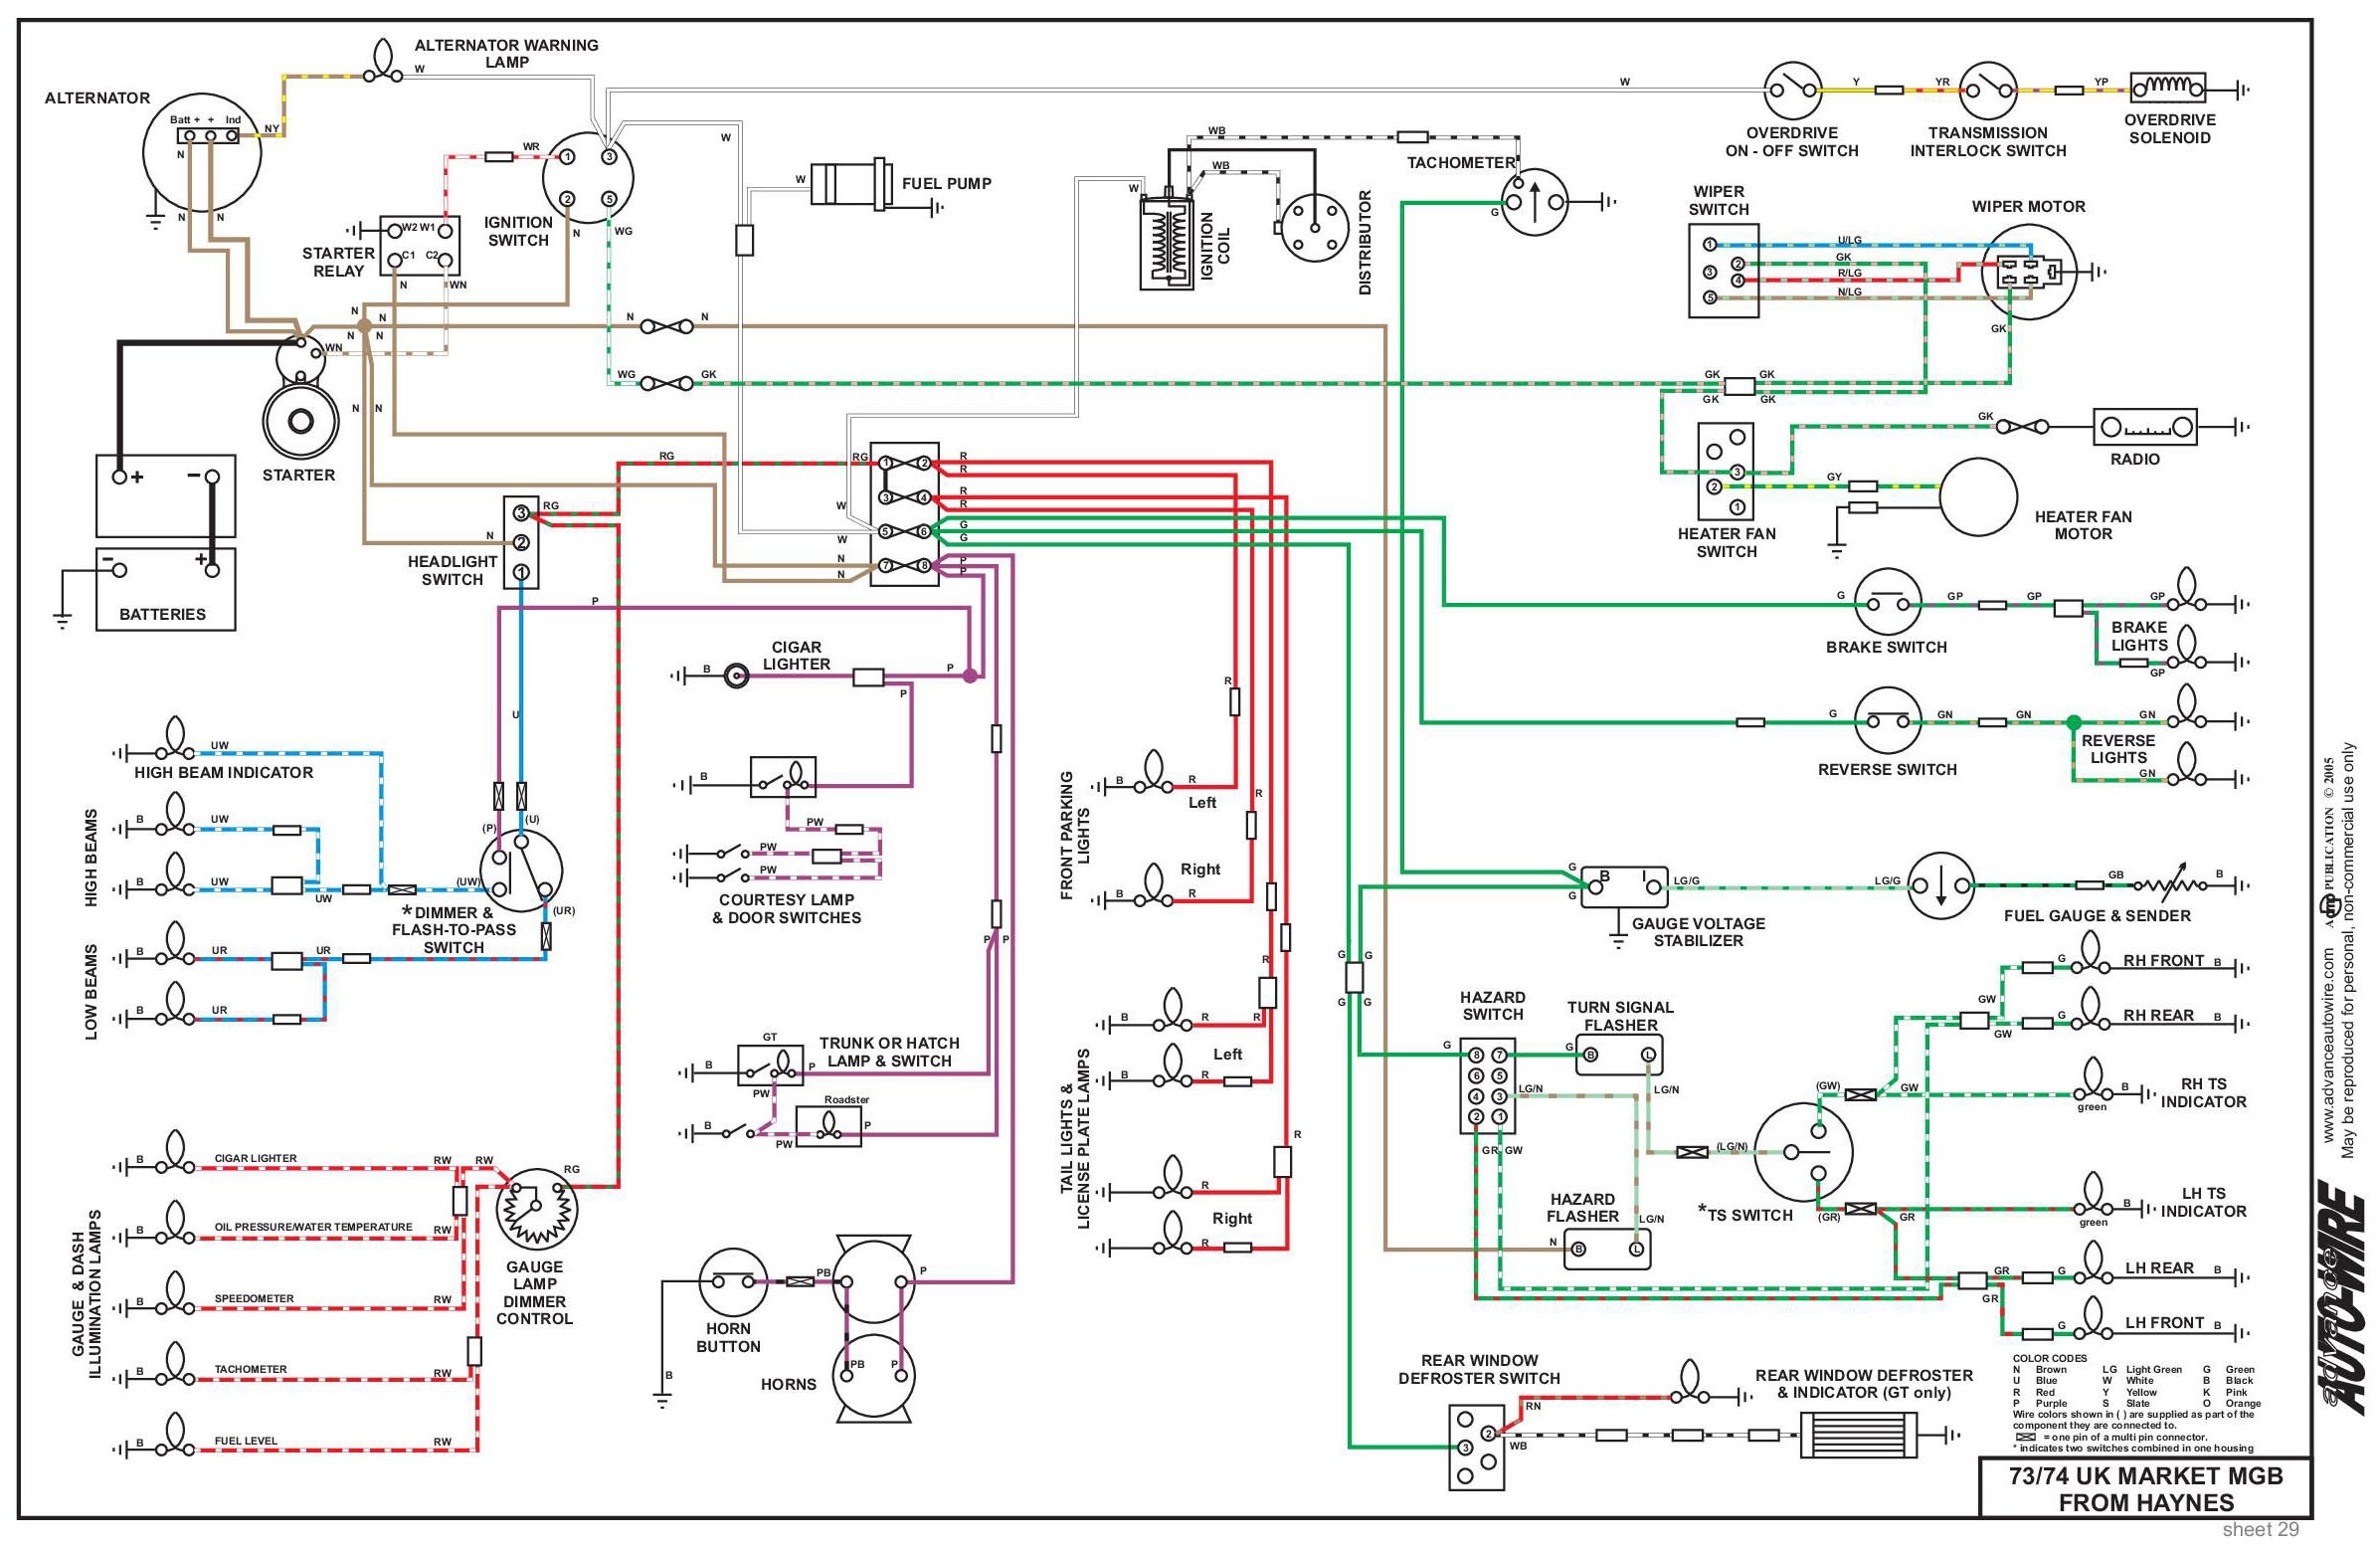 Electronic Turn Signal Flasher Schematic Electrical System Of Electronic Turn Signal Flasher Schematic